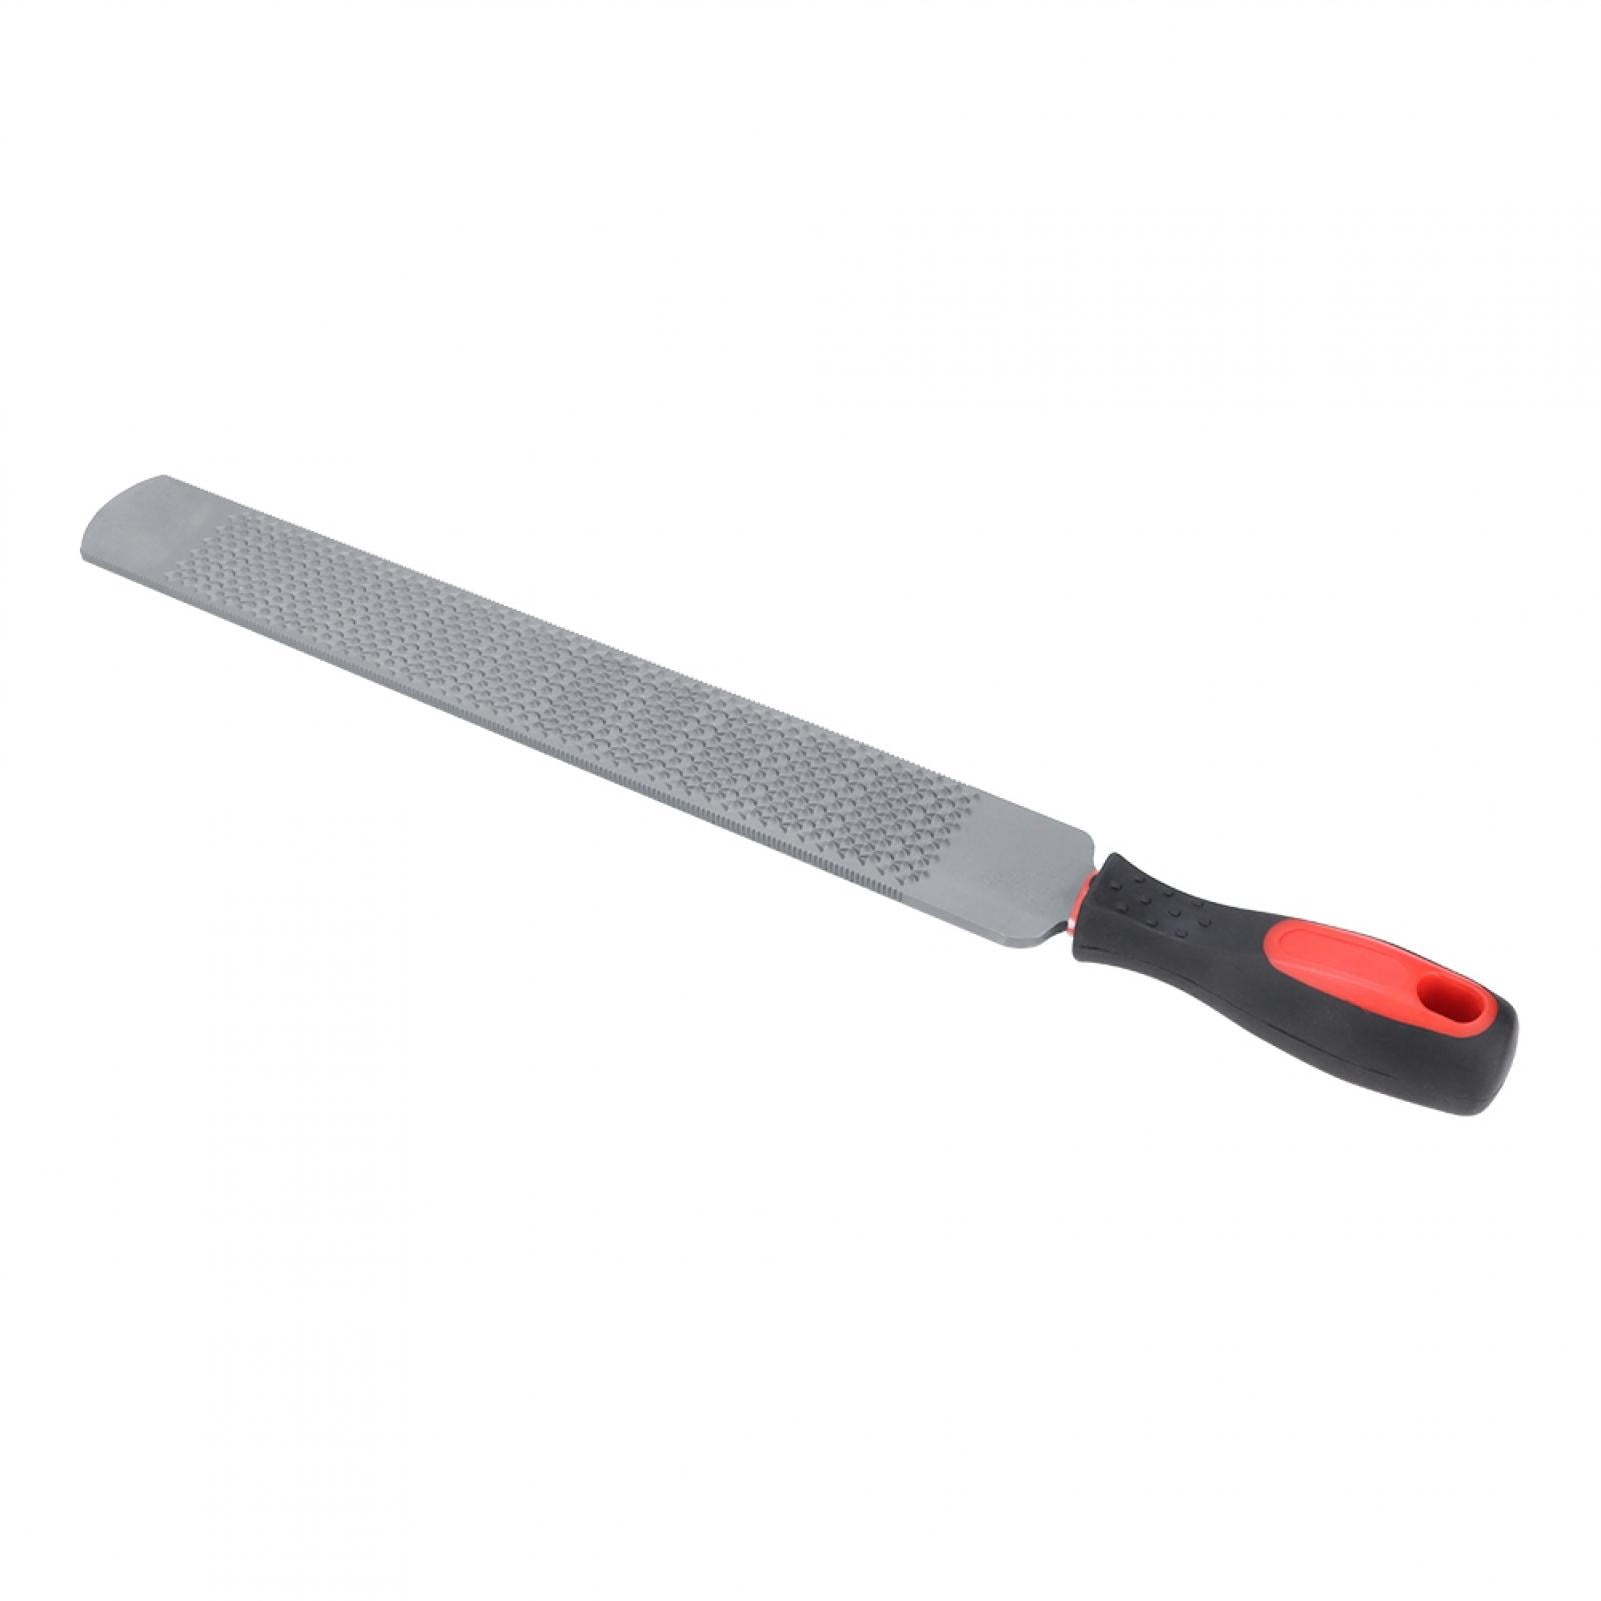 Horses and Sheep Stable Equestrian Supplies,Suitable for hoof Repair of Cattle SUNYUEWALLET Hoof Rasp with Handle Trimming File Iron Horseshoe File Farrier Horseshoe Repair Tools 